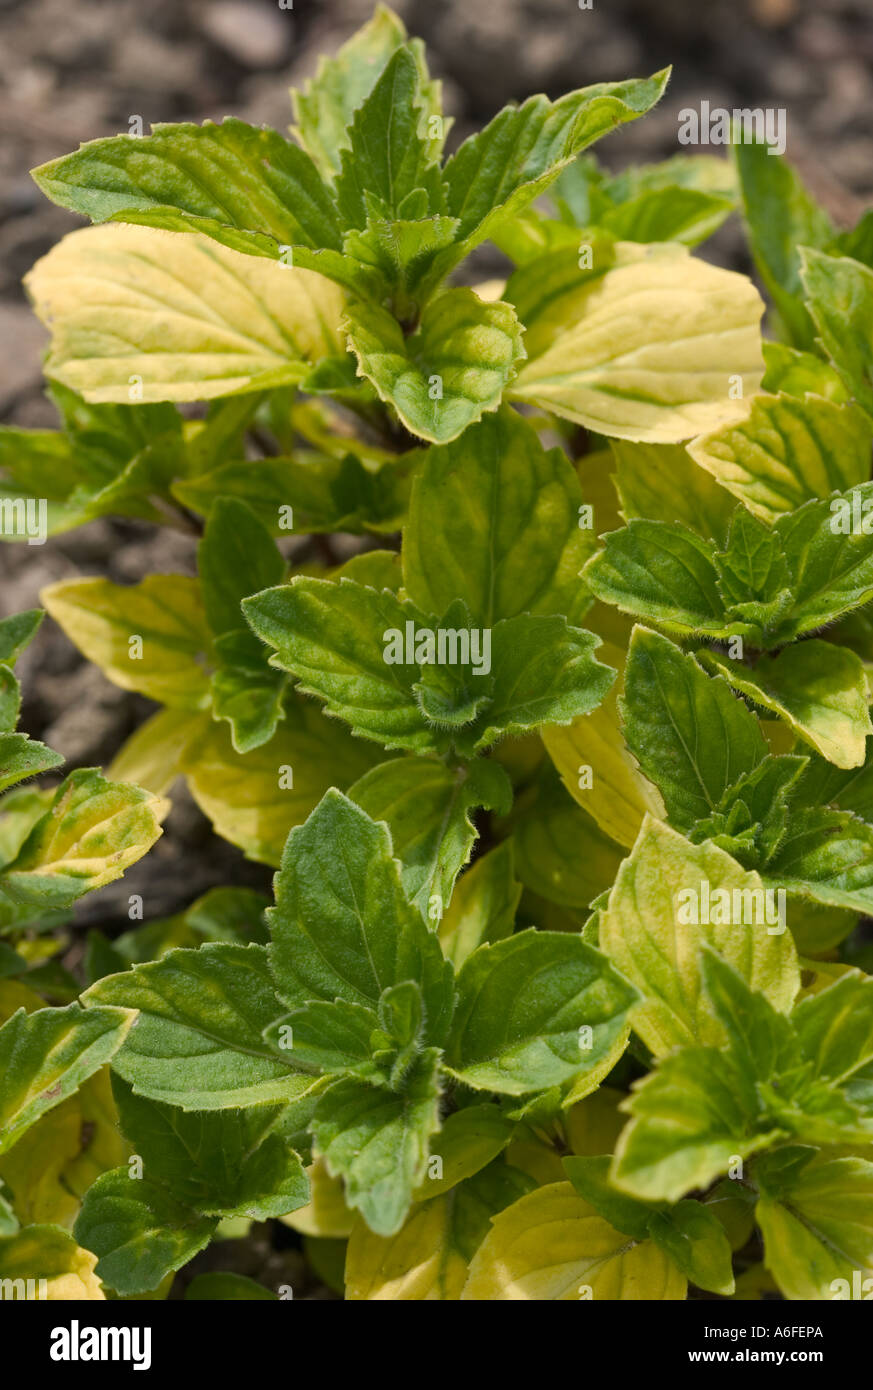 Close up shot of Ginger mint 'Mentha x gracilllis' variegated yellow/green leaves Stock Photo